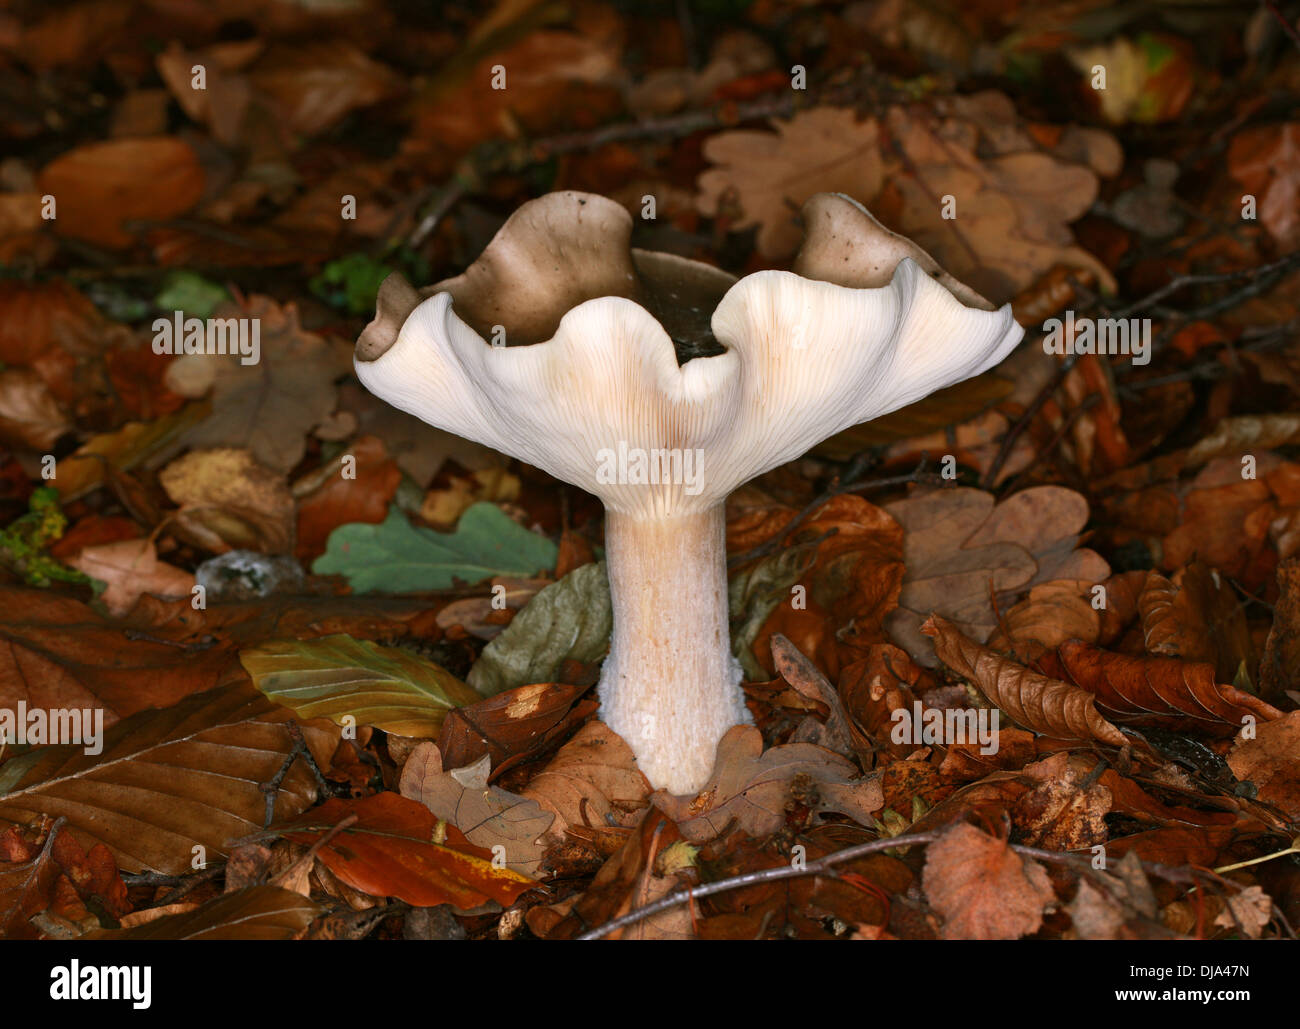 Club Foot oder Club-footed Clitocybe, Ampulloclitocybe Clavipes, Tricholomataceae. Sy Clitocybe Clavipes, Agaricus Clavipes. Stockfoto